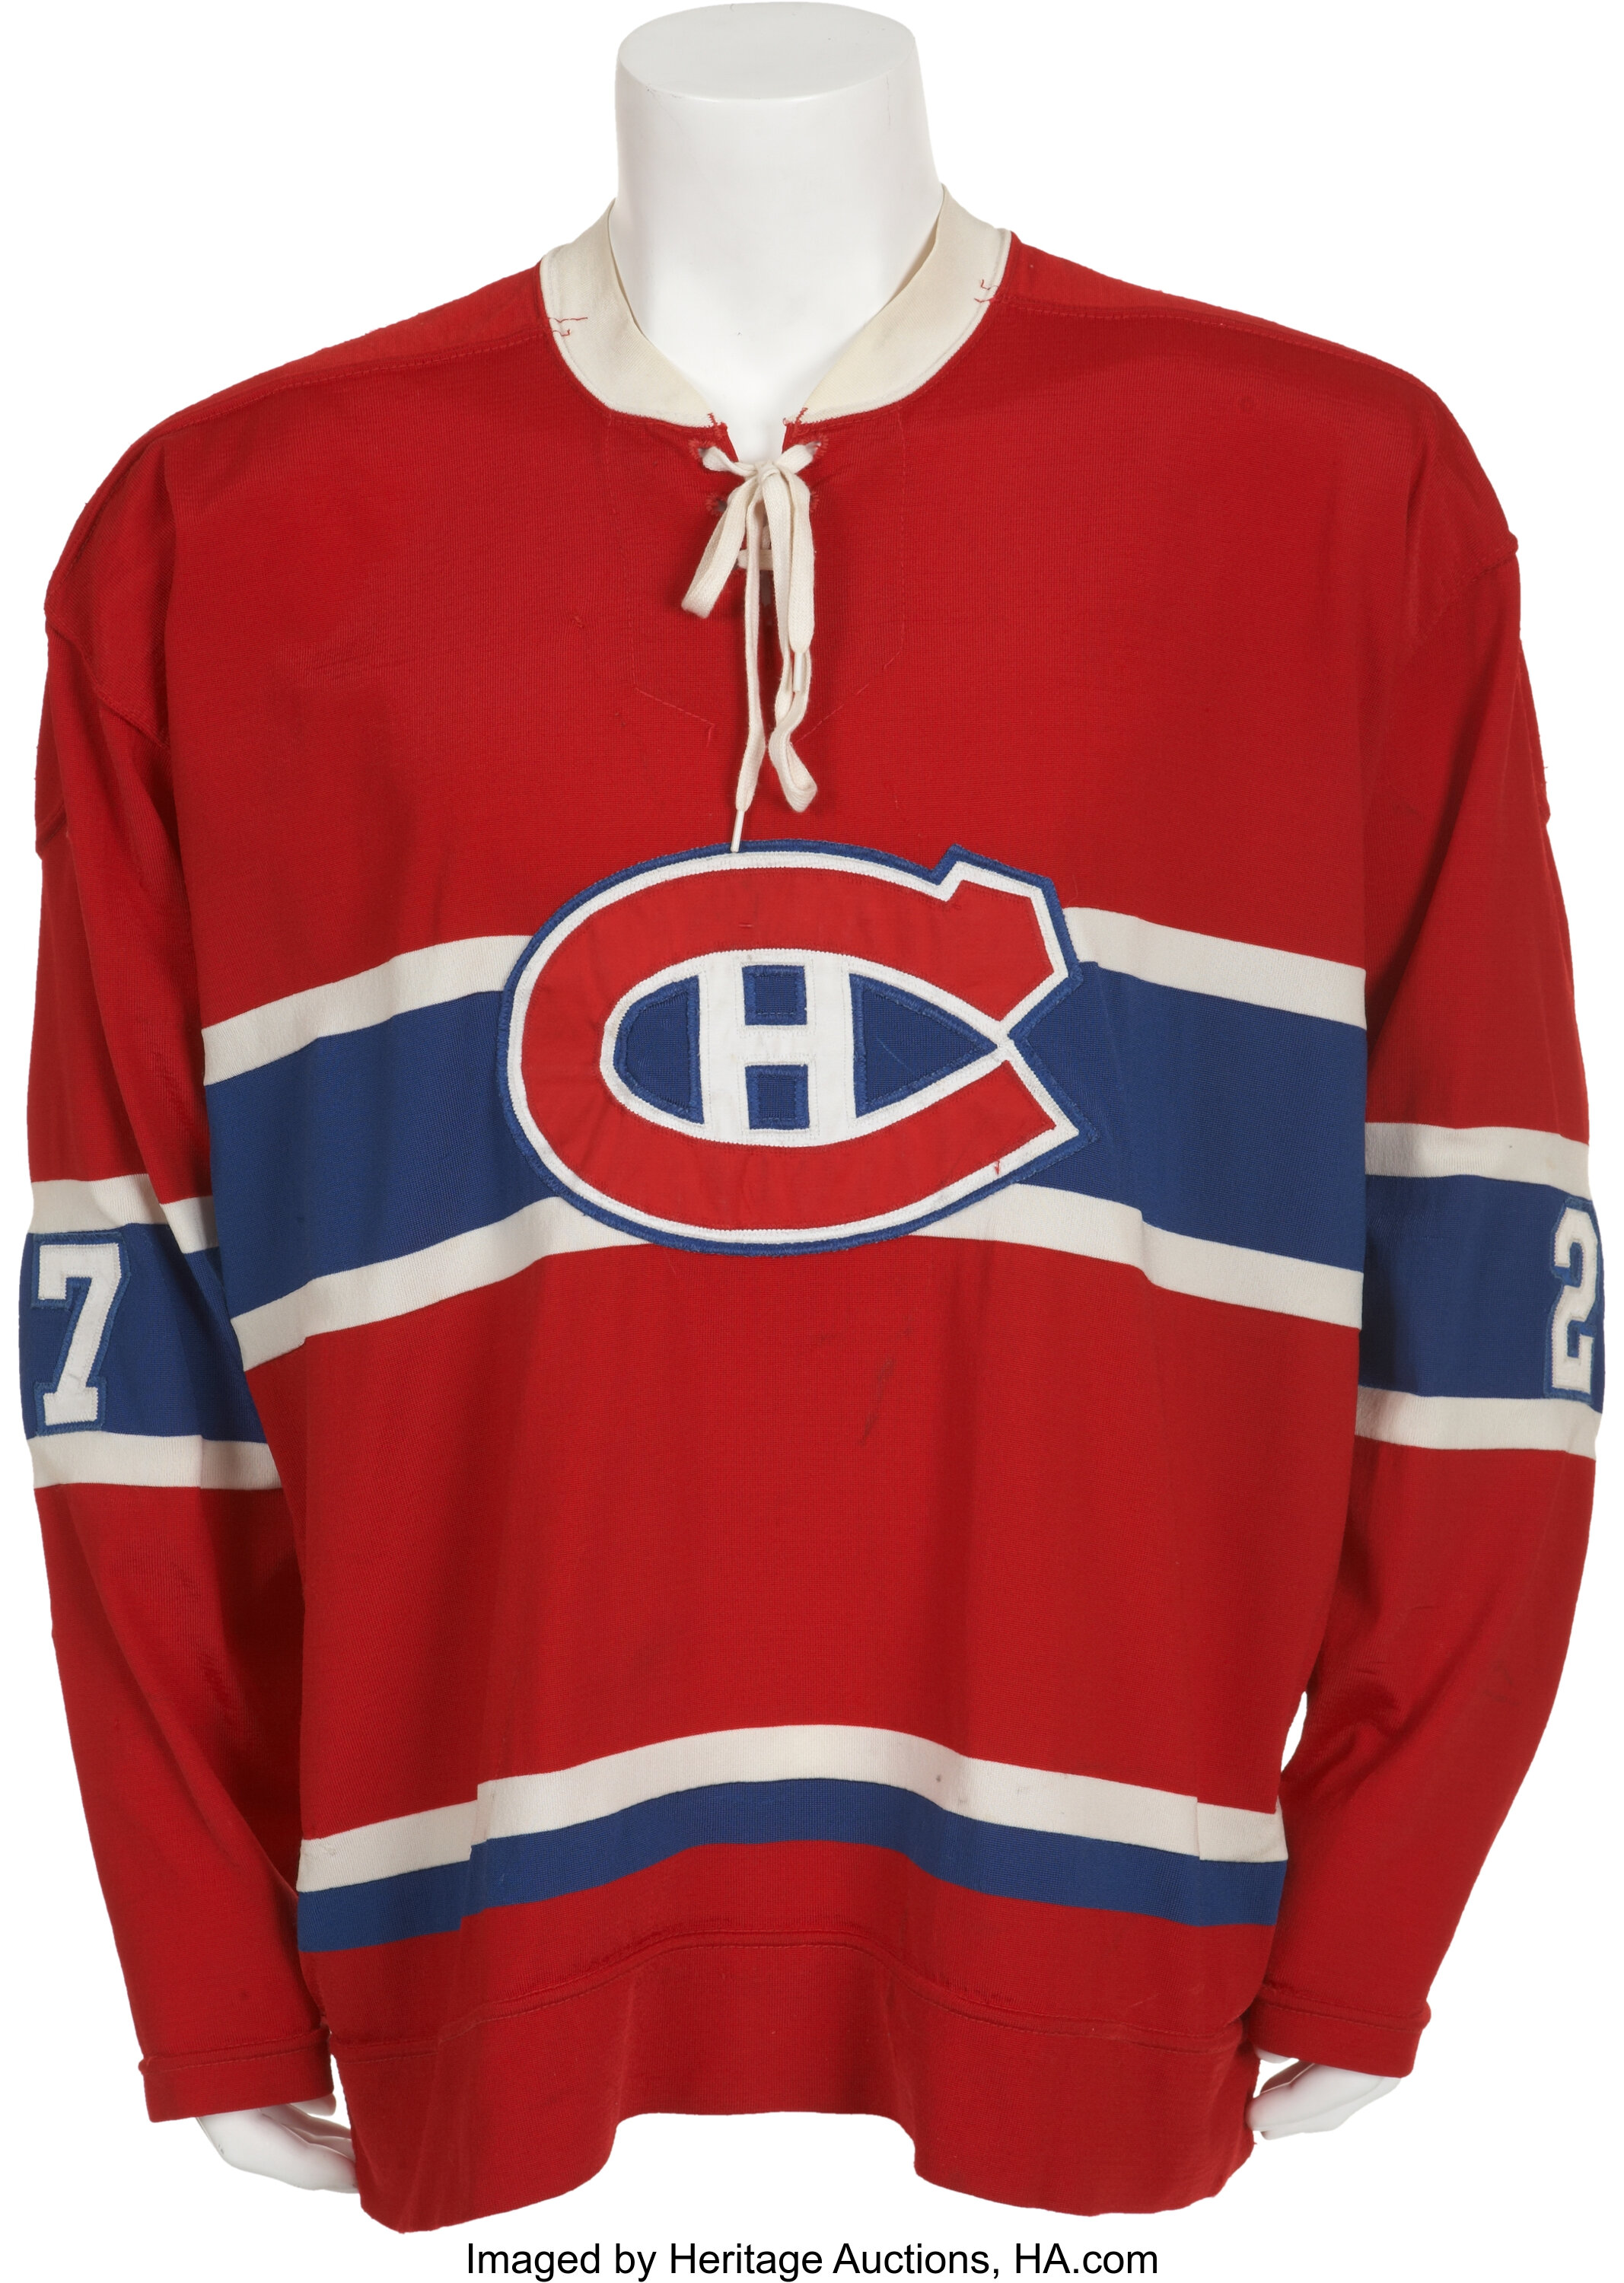 Buy Cheap Montreal Canadiens Jersey Sale Canada